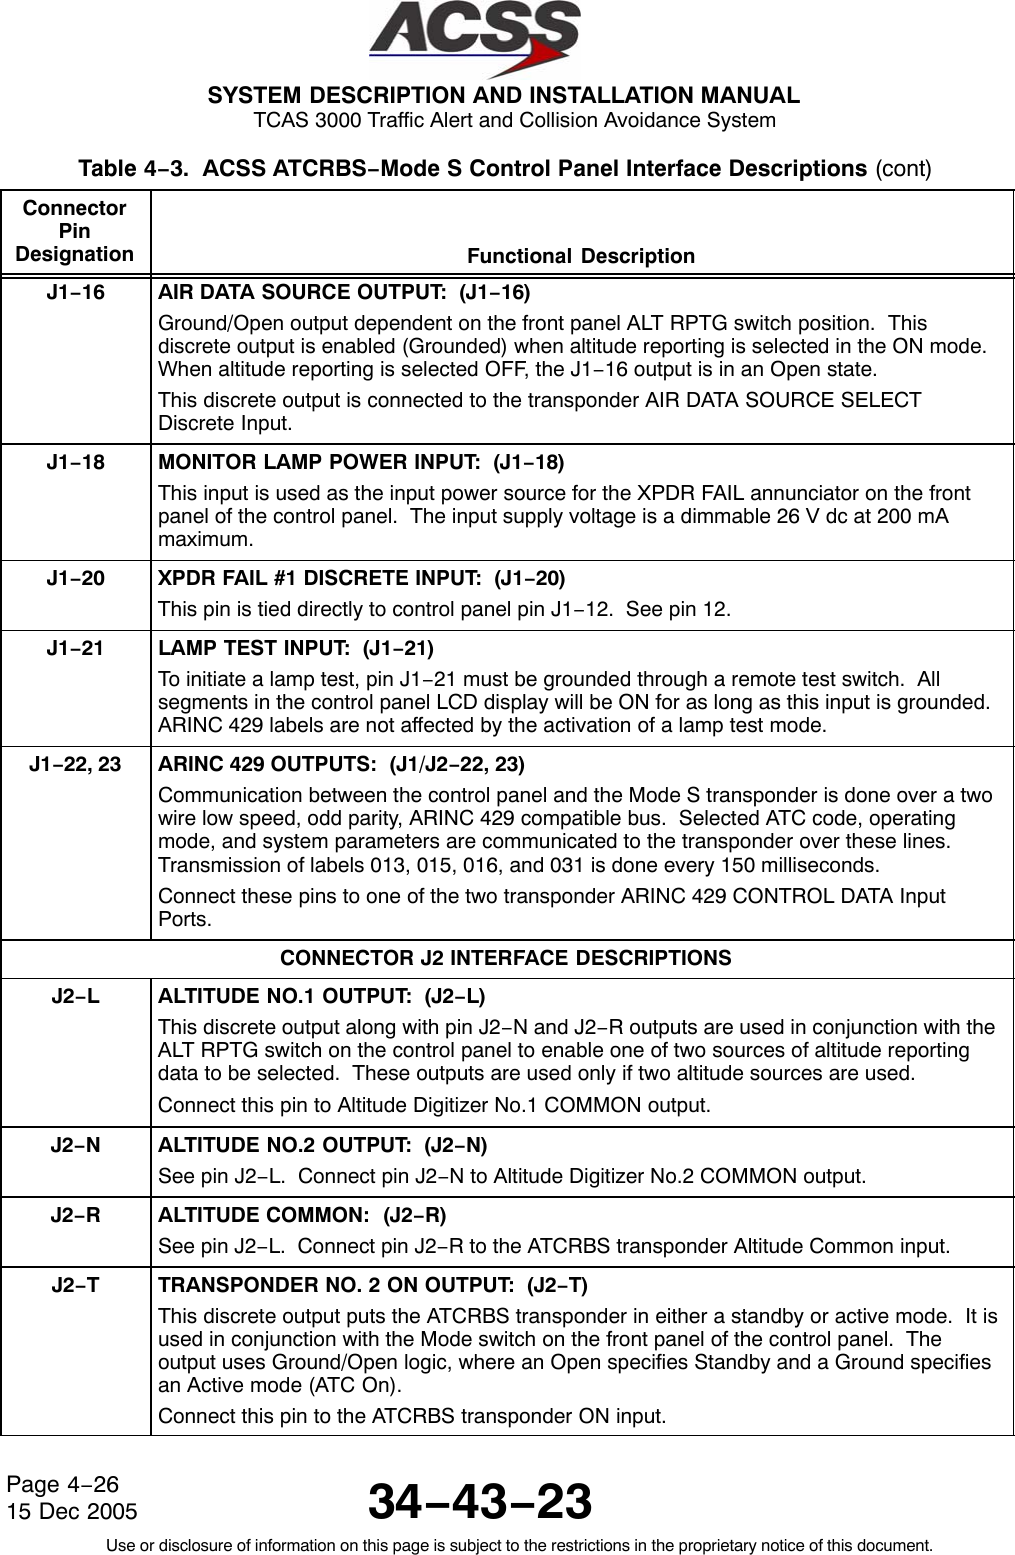  SYSTEM DESCRIPTION AND INSTALLATION MANUAL TCAS 3000 Traffic Alert and Collision Avoidance System34−43−23Use or disclosure of information on this page is subject to the restrictions in the proprietary notice of this document.Page 4−2615 Dec 2005Table 4−3.  ACSS ATCRBS−Mode S Control Panel Interface Descriptions (cont)ConnectorPinDesignation Functional DescriptionJ1−16 AIR DATA SOURCE OUTPUT:  (J1−16)Ground/Open output dependent on the front panel ALT RPTG switch position.  Thisdiscrete output is enabled (Grounded) when altitude reporting is selected in the ON mode.When altitude reporting is selected OFF, the J1−16 output is in an Open state.This discrete output is connected to the transponder AIR DATA SOURCE SELECTDiscrete Input.J1−18 MONITOR LAMP POWER INPUT:  (J1−18)This input is used as the input power source for the XPDR FAIL annunciator on the frontpanel of the control panel.  The input supply voltage is a dimmable 26 V dc at 200 mAmaximum.J1−20 XPDR FAIL #1 DISCRETE INPUT:  (J1−20)This pin is tied directly to control panel pin J1−12.  See pin 12.J1−21 LAMP TEST INPUT:  (J1−21)To initiate a lamp test, pin J1−21 must be grounded through a remote test switch.  Allsegments in the control panel LCD display will be ON for as long as this input is grounded.ARINC 429 labels are not affected by the activation of a lamp test mode.J1−22, 23 ARINC 429 OUTPUTS:  (J1/J2−22, 23)Communication between the control panel and the Mode S transponder is done over a twowire low speed, odd parity, ARINC 429 compatible bus.  Selected ATC code, operatingmode, and system parameters are communicated to the transponder over these lines.Transmission of labels 013, 015, 016, and 031 is done every 150 milliseconds.Connect these pins to one of the two transponder ARINC 429 CONTROL DATA InputPorts.CONNECTOR J2 INTERFACE DESCRIPTIONSJ2−LALTITUDE NO.1 OUTPUT:  (J2−L)This discrete output along with pin J2−N and J2−R outputs are used in conjunction with theALT RPTG switch on the control panel to enable one of two sources of altitude reportingdata to be selected.  These outputs are used only if two altitude sources are used.Connect this pin to Altitude Digitizer No.1 COMMON output.J2−NALTITUDE NO.2 OUTPUT:  (J2−N)See pin J2−L.  Connect pin J2−N to Altitude Digitizer No.2 COMMON output.J2−RALTITUDE COMMON:  (J2−R)See pin J2−L.  Connect pin J2−R to the ATCRBS transponder Altitude Common input.J2−TTRANSPONDER NO. 2 ON OUTPUT:  (J2−T)This discrete output puts the ATCRBS transponder in either a standby or active mode.  It isused in conjunction with the Mode switch on the front panel of the control panel.  Theoutput uses Ground/Open logic, where an Open specifies Standby and a Ground specifiesan Active mode (ATC On).Connect this pin to the ATCRBS transponder ON input.